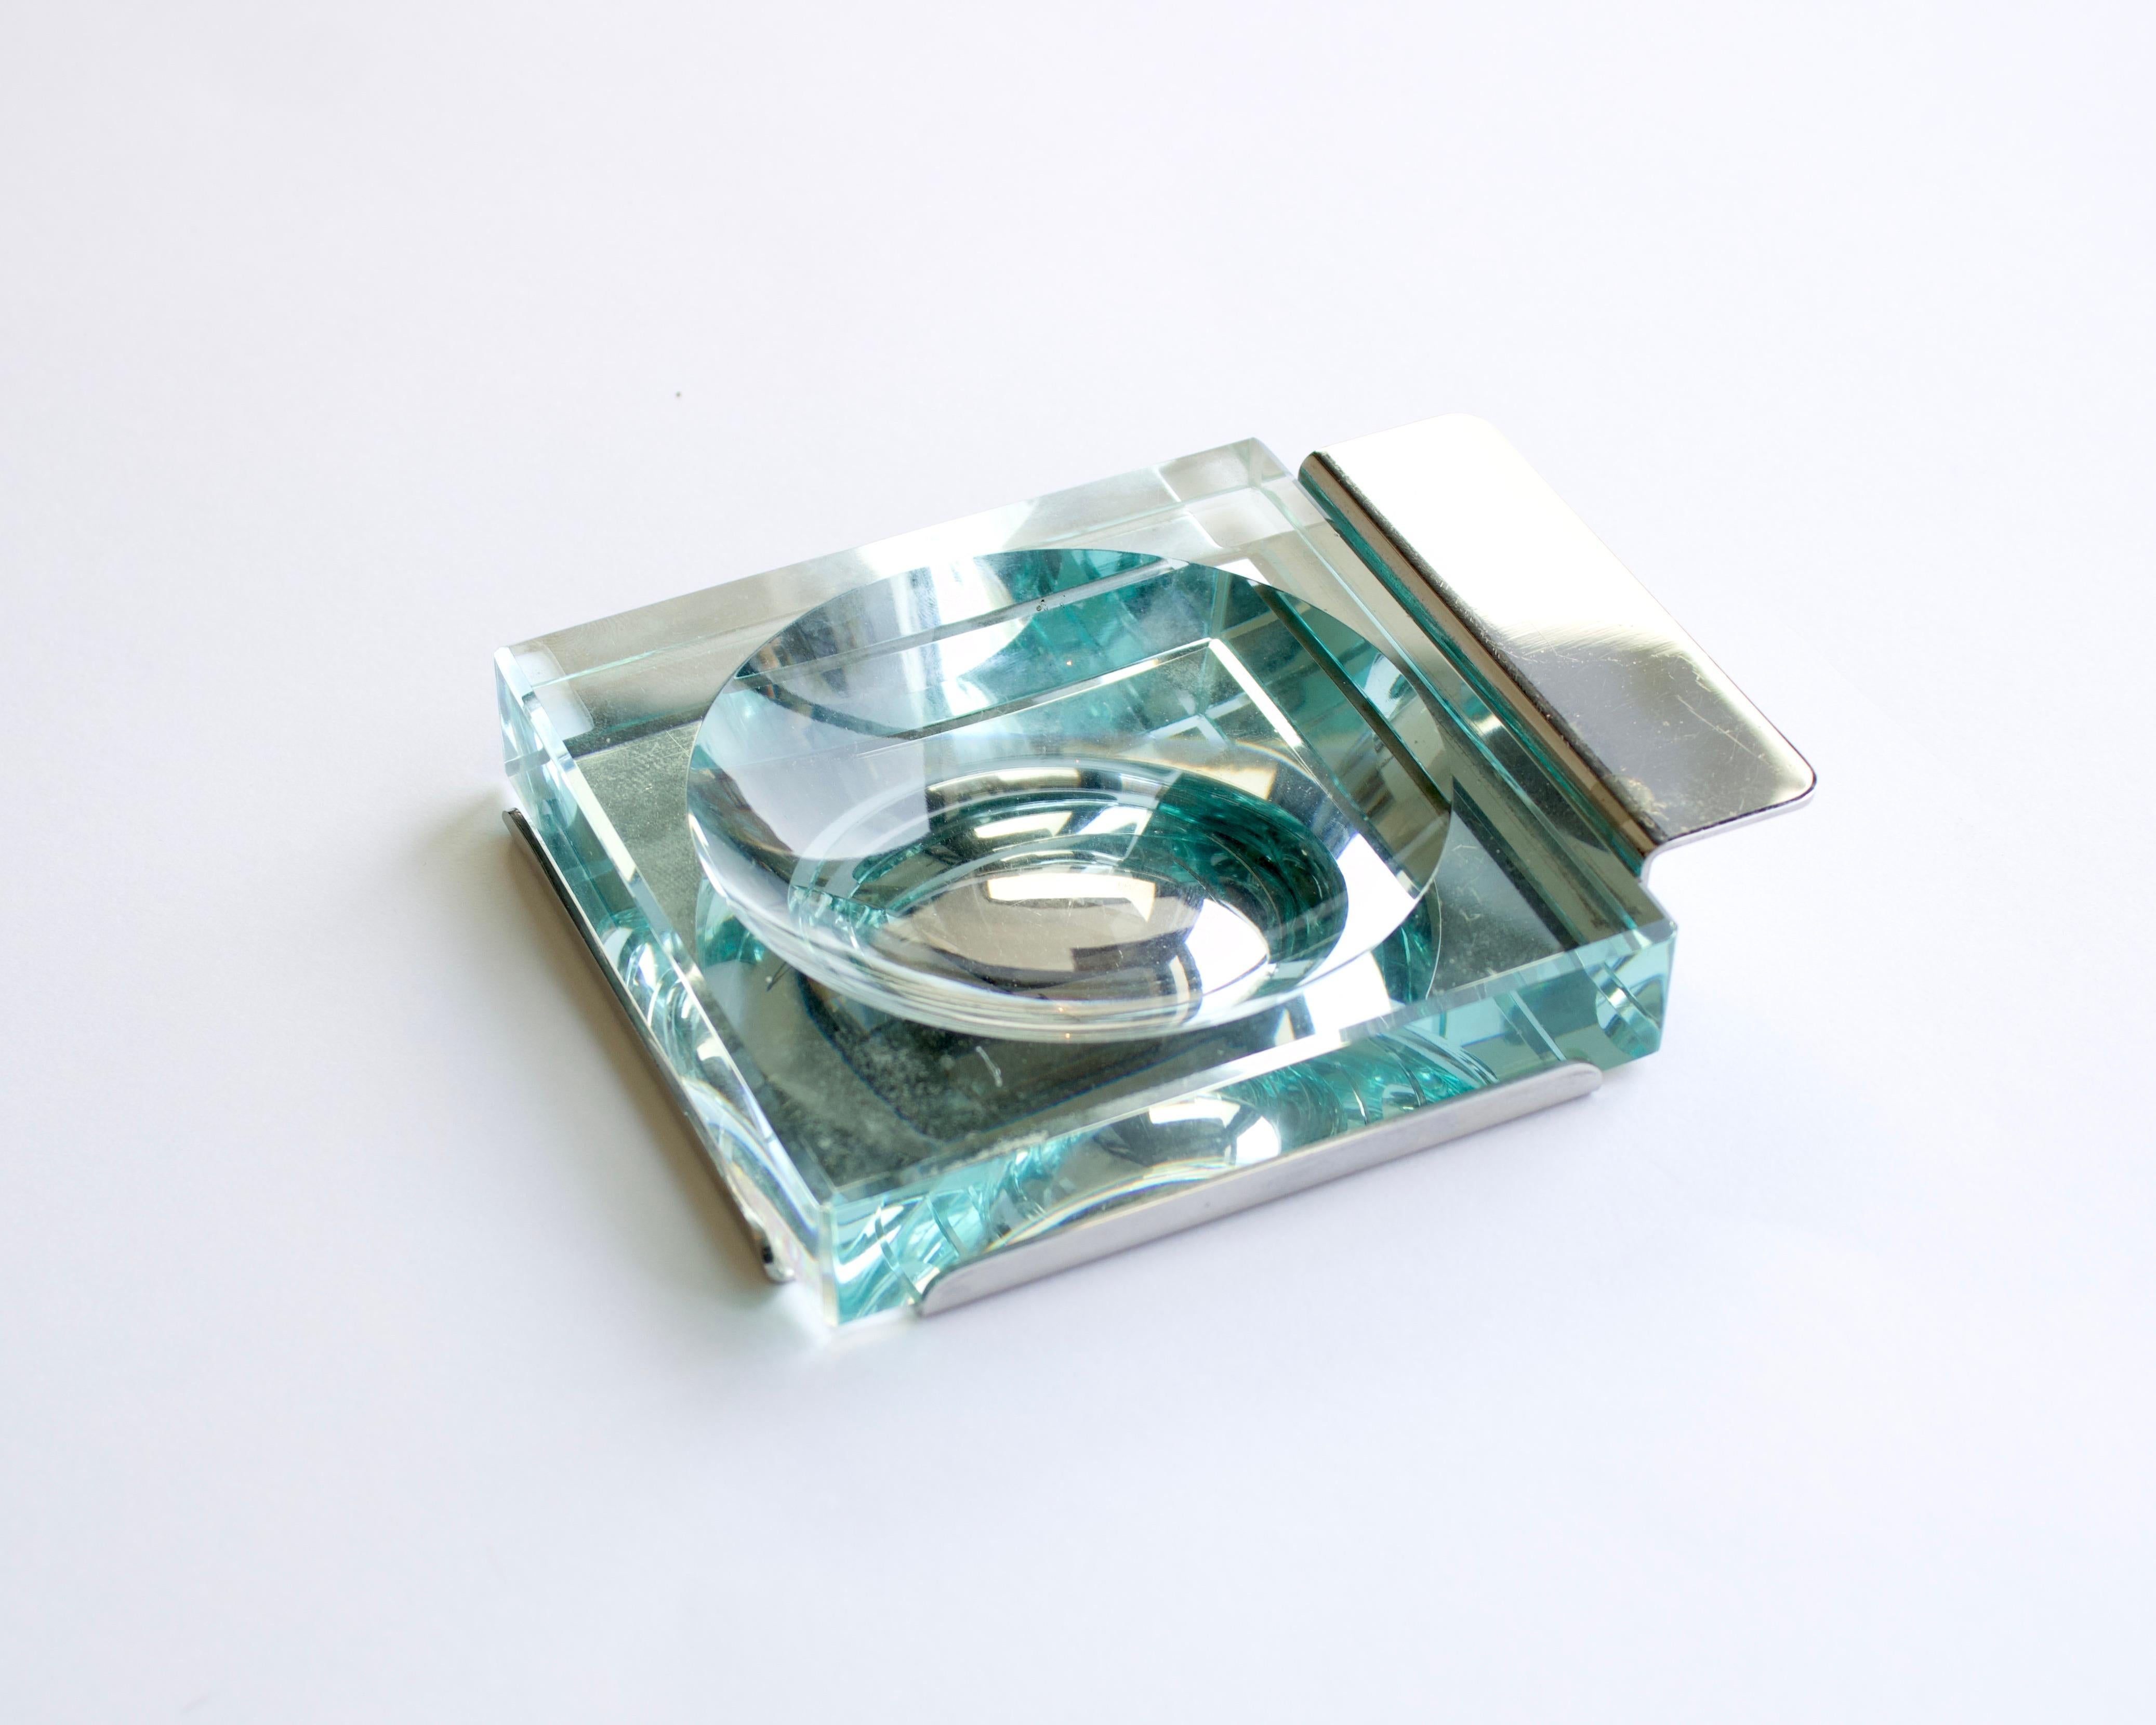 Fontana Arte Sergio Mazza Arthur Krupp Giuliana Gramigna
Crystal Glass and Stainless Empty Pocket catchall tray Vide Poche 

An Italian vintage vide poche /catchall tray made by Fontana Arte with strongwood glass in nile green color and stainless